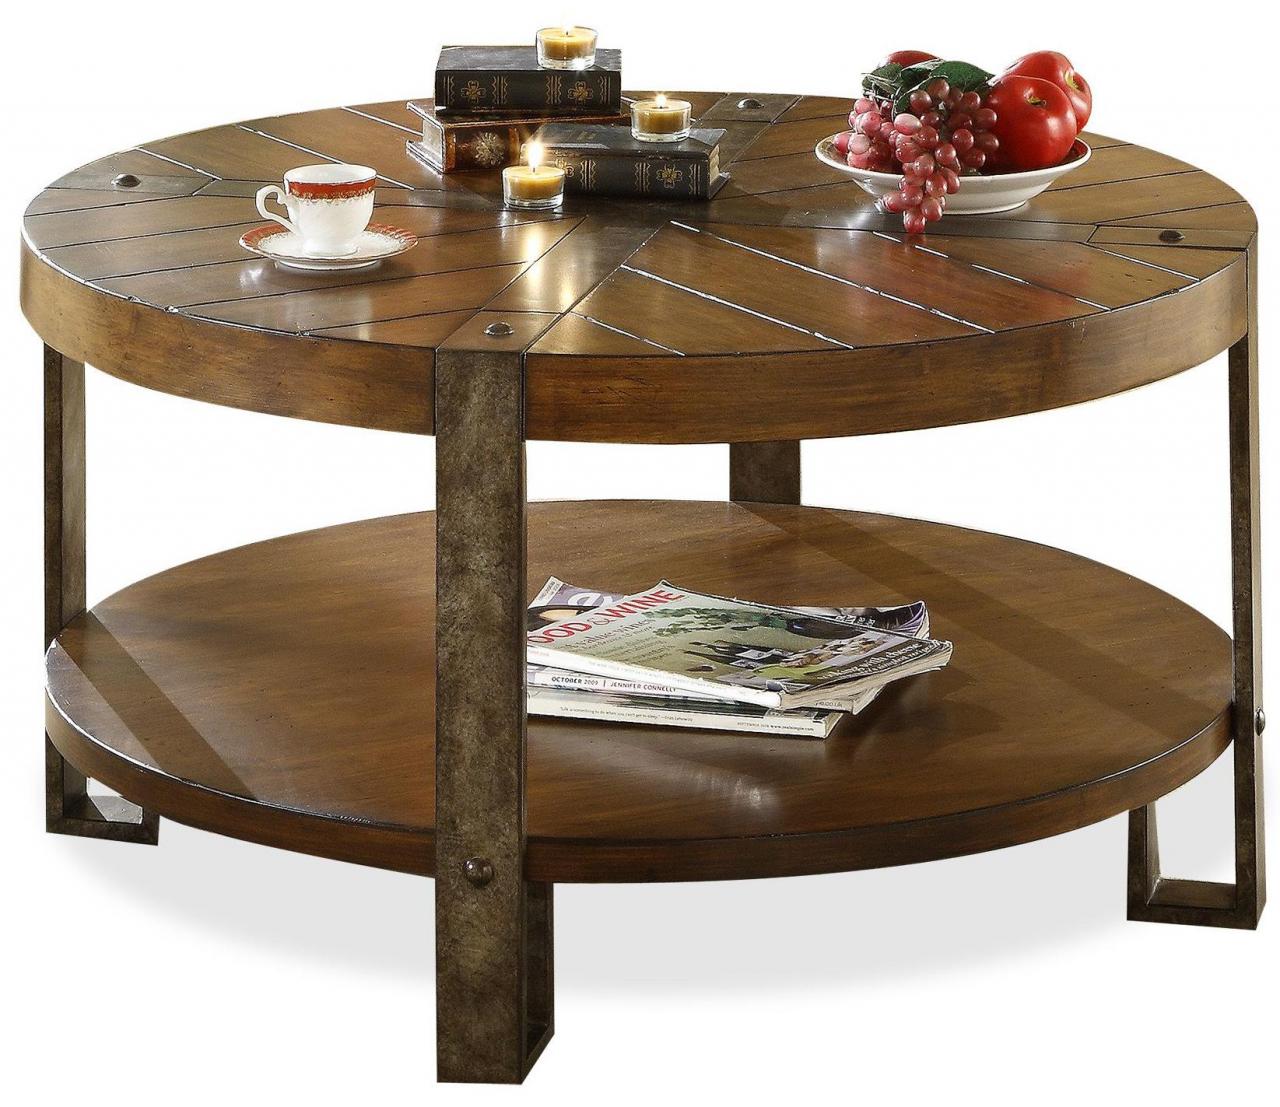 Round Coffee Tables with Storage HomesFeed